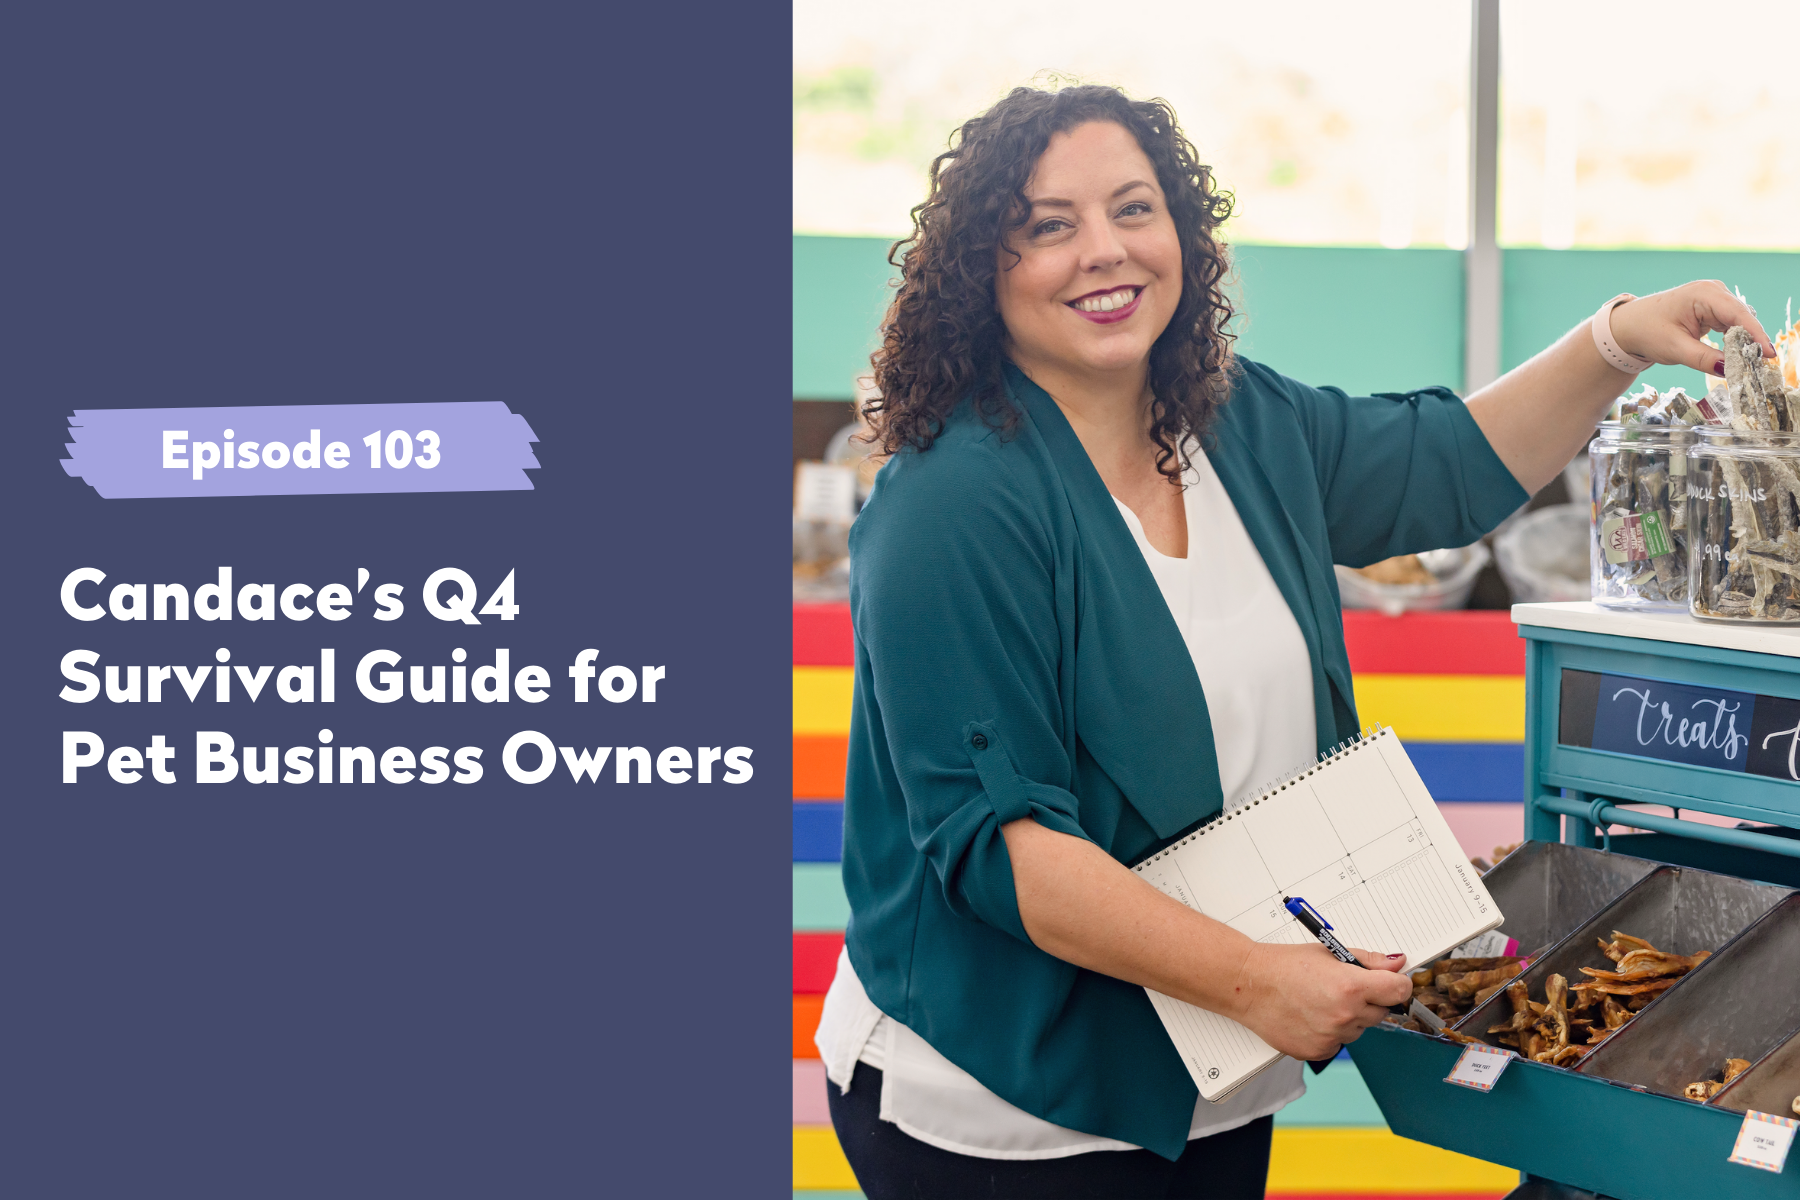 Episode 103 | Candace’s Q4 Survival Guide for Pet Business Owners